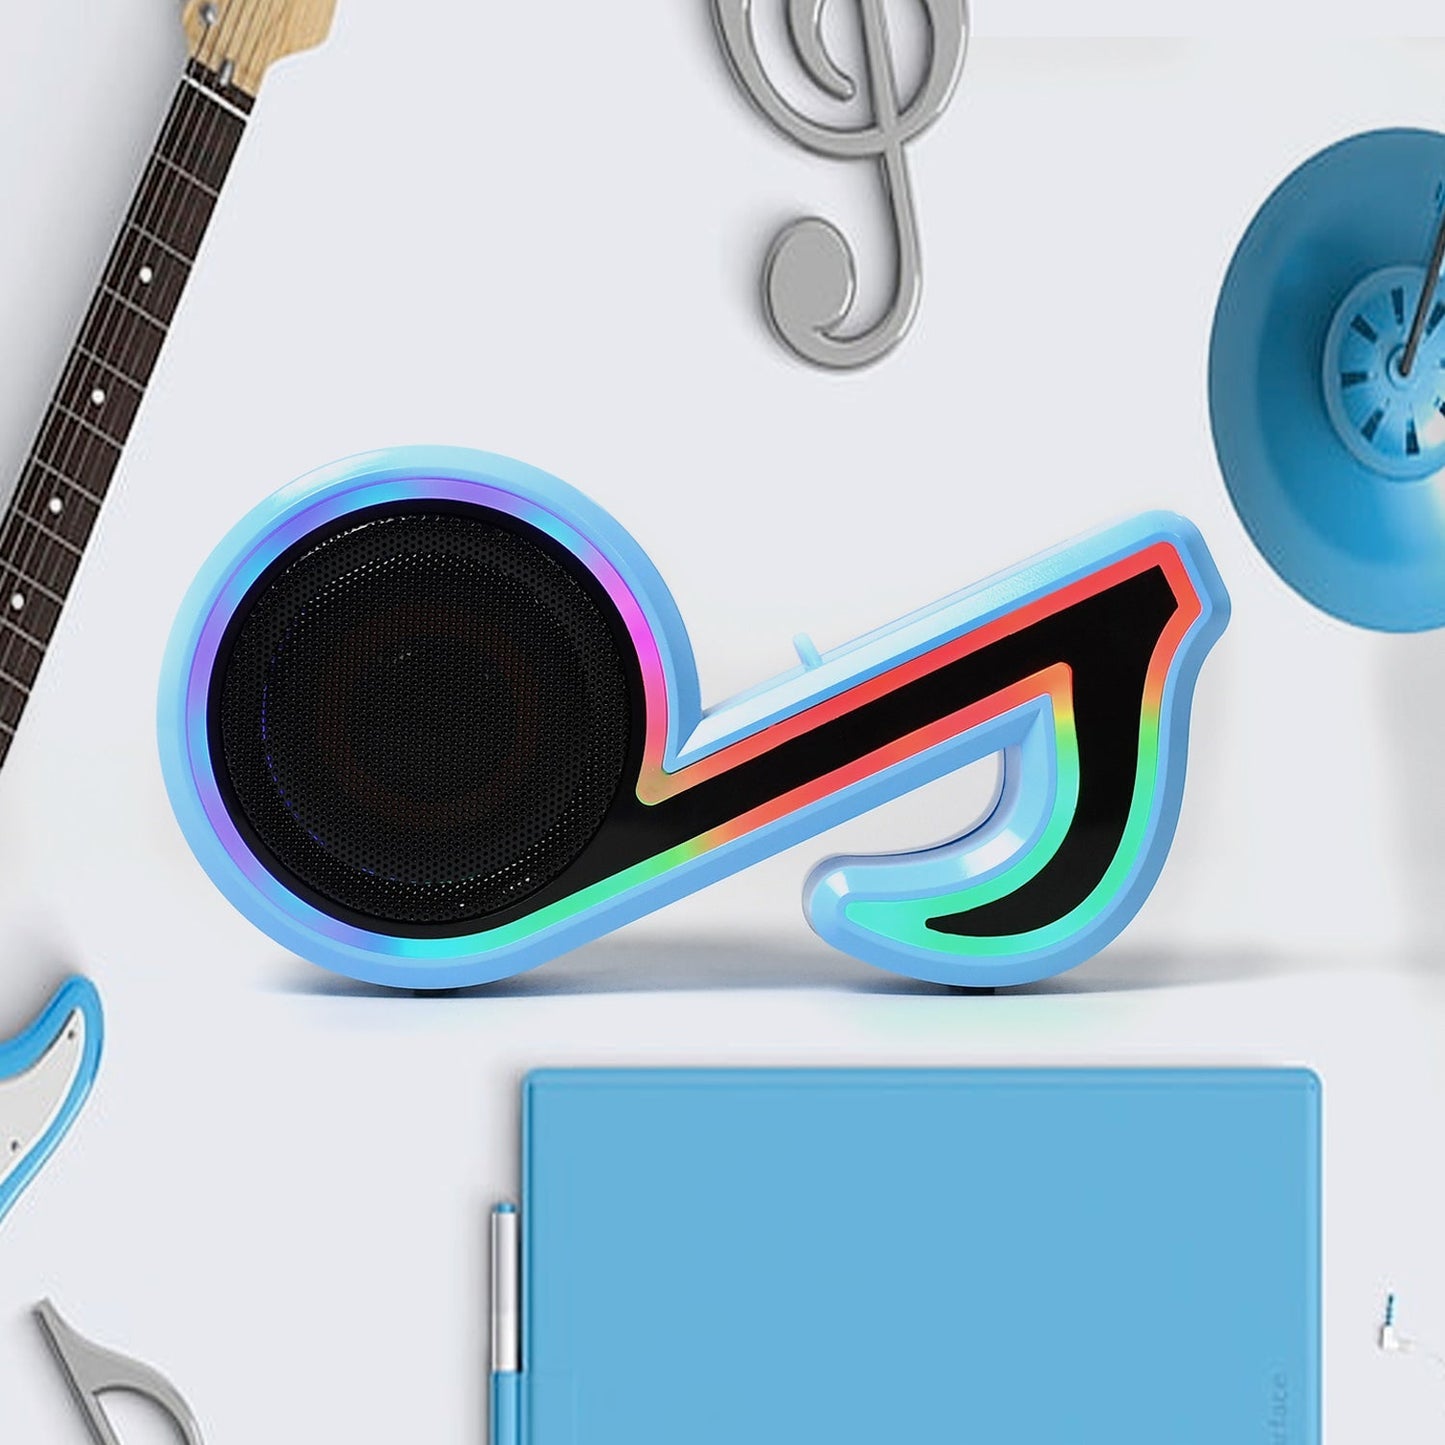 Mini Portable Music Note Shape Speaker Subwoofer Colorful Musical Note LED Lighting Sound For Creatives Gift Computer Phone Sound Equipment blootuth speaker (Media Player)